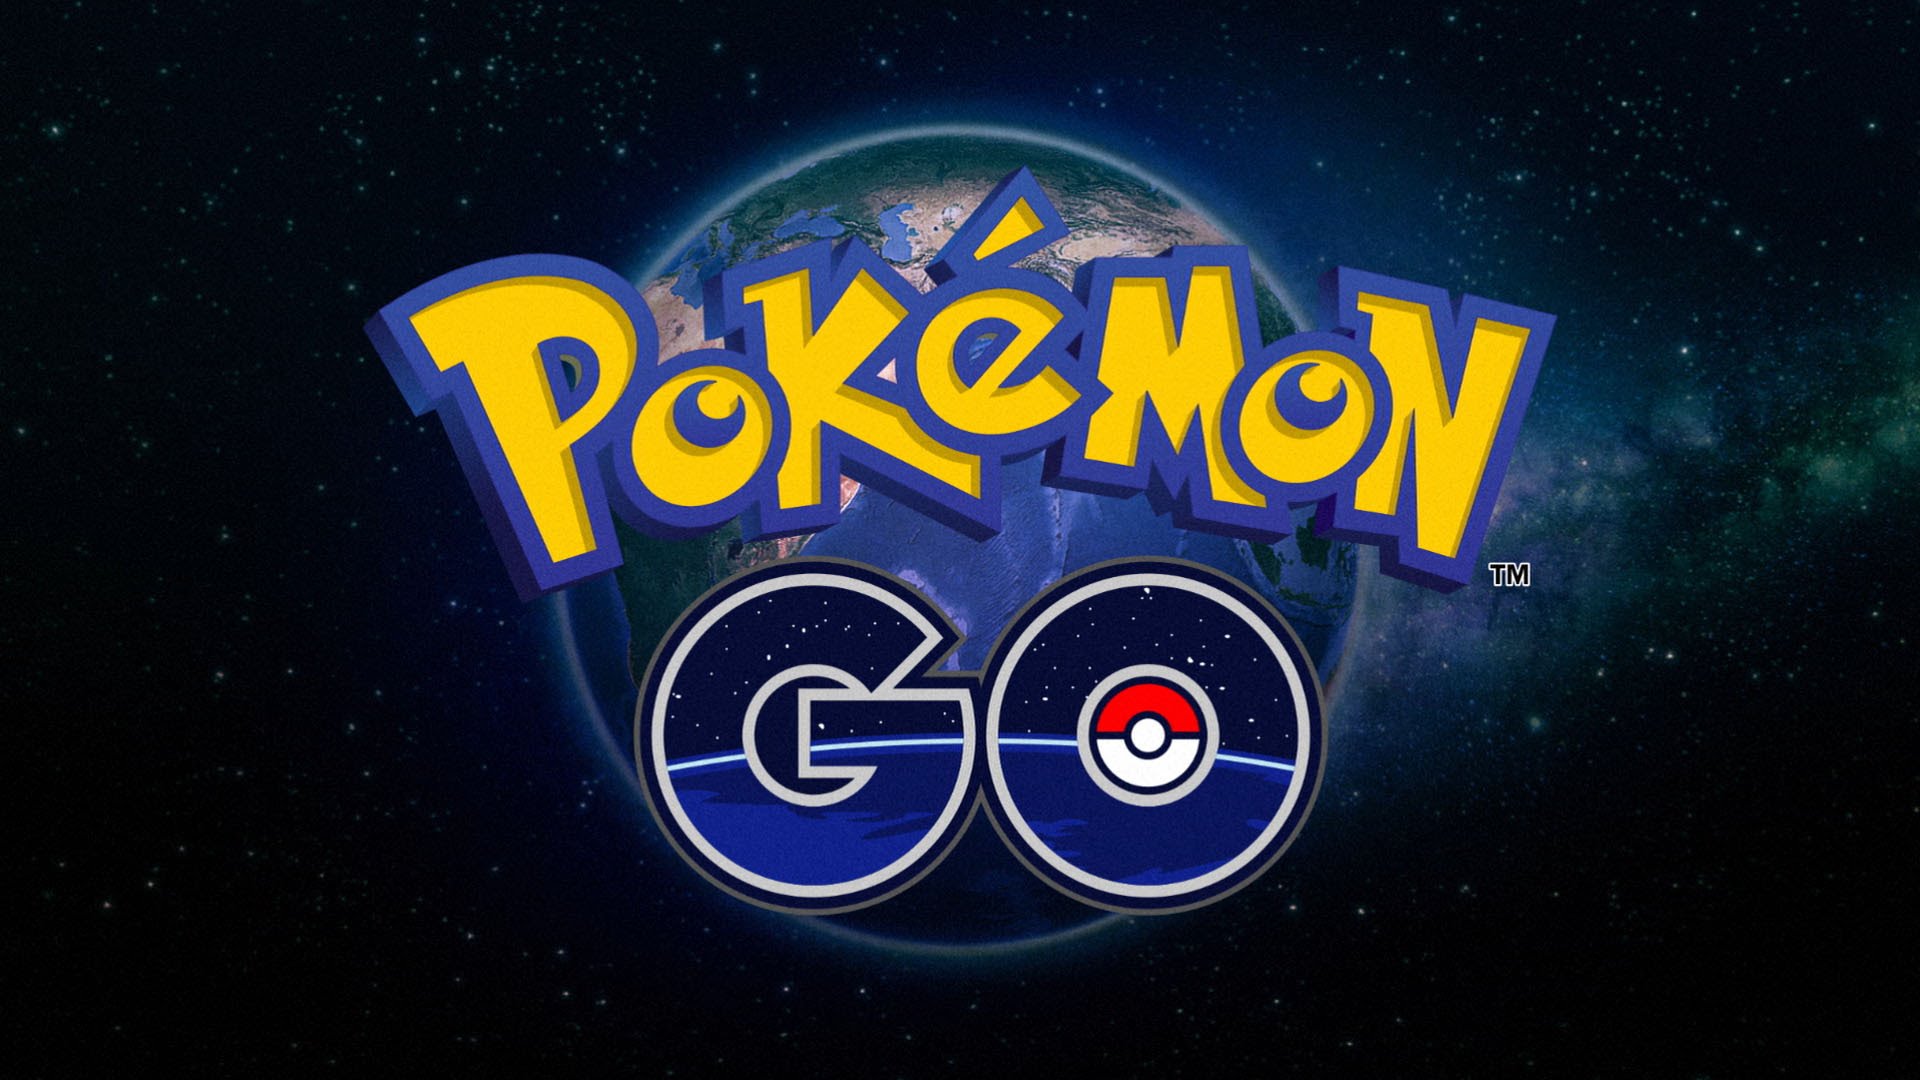 ‘Pokémon GO’ to Surpass Twitter in Daily Active Users